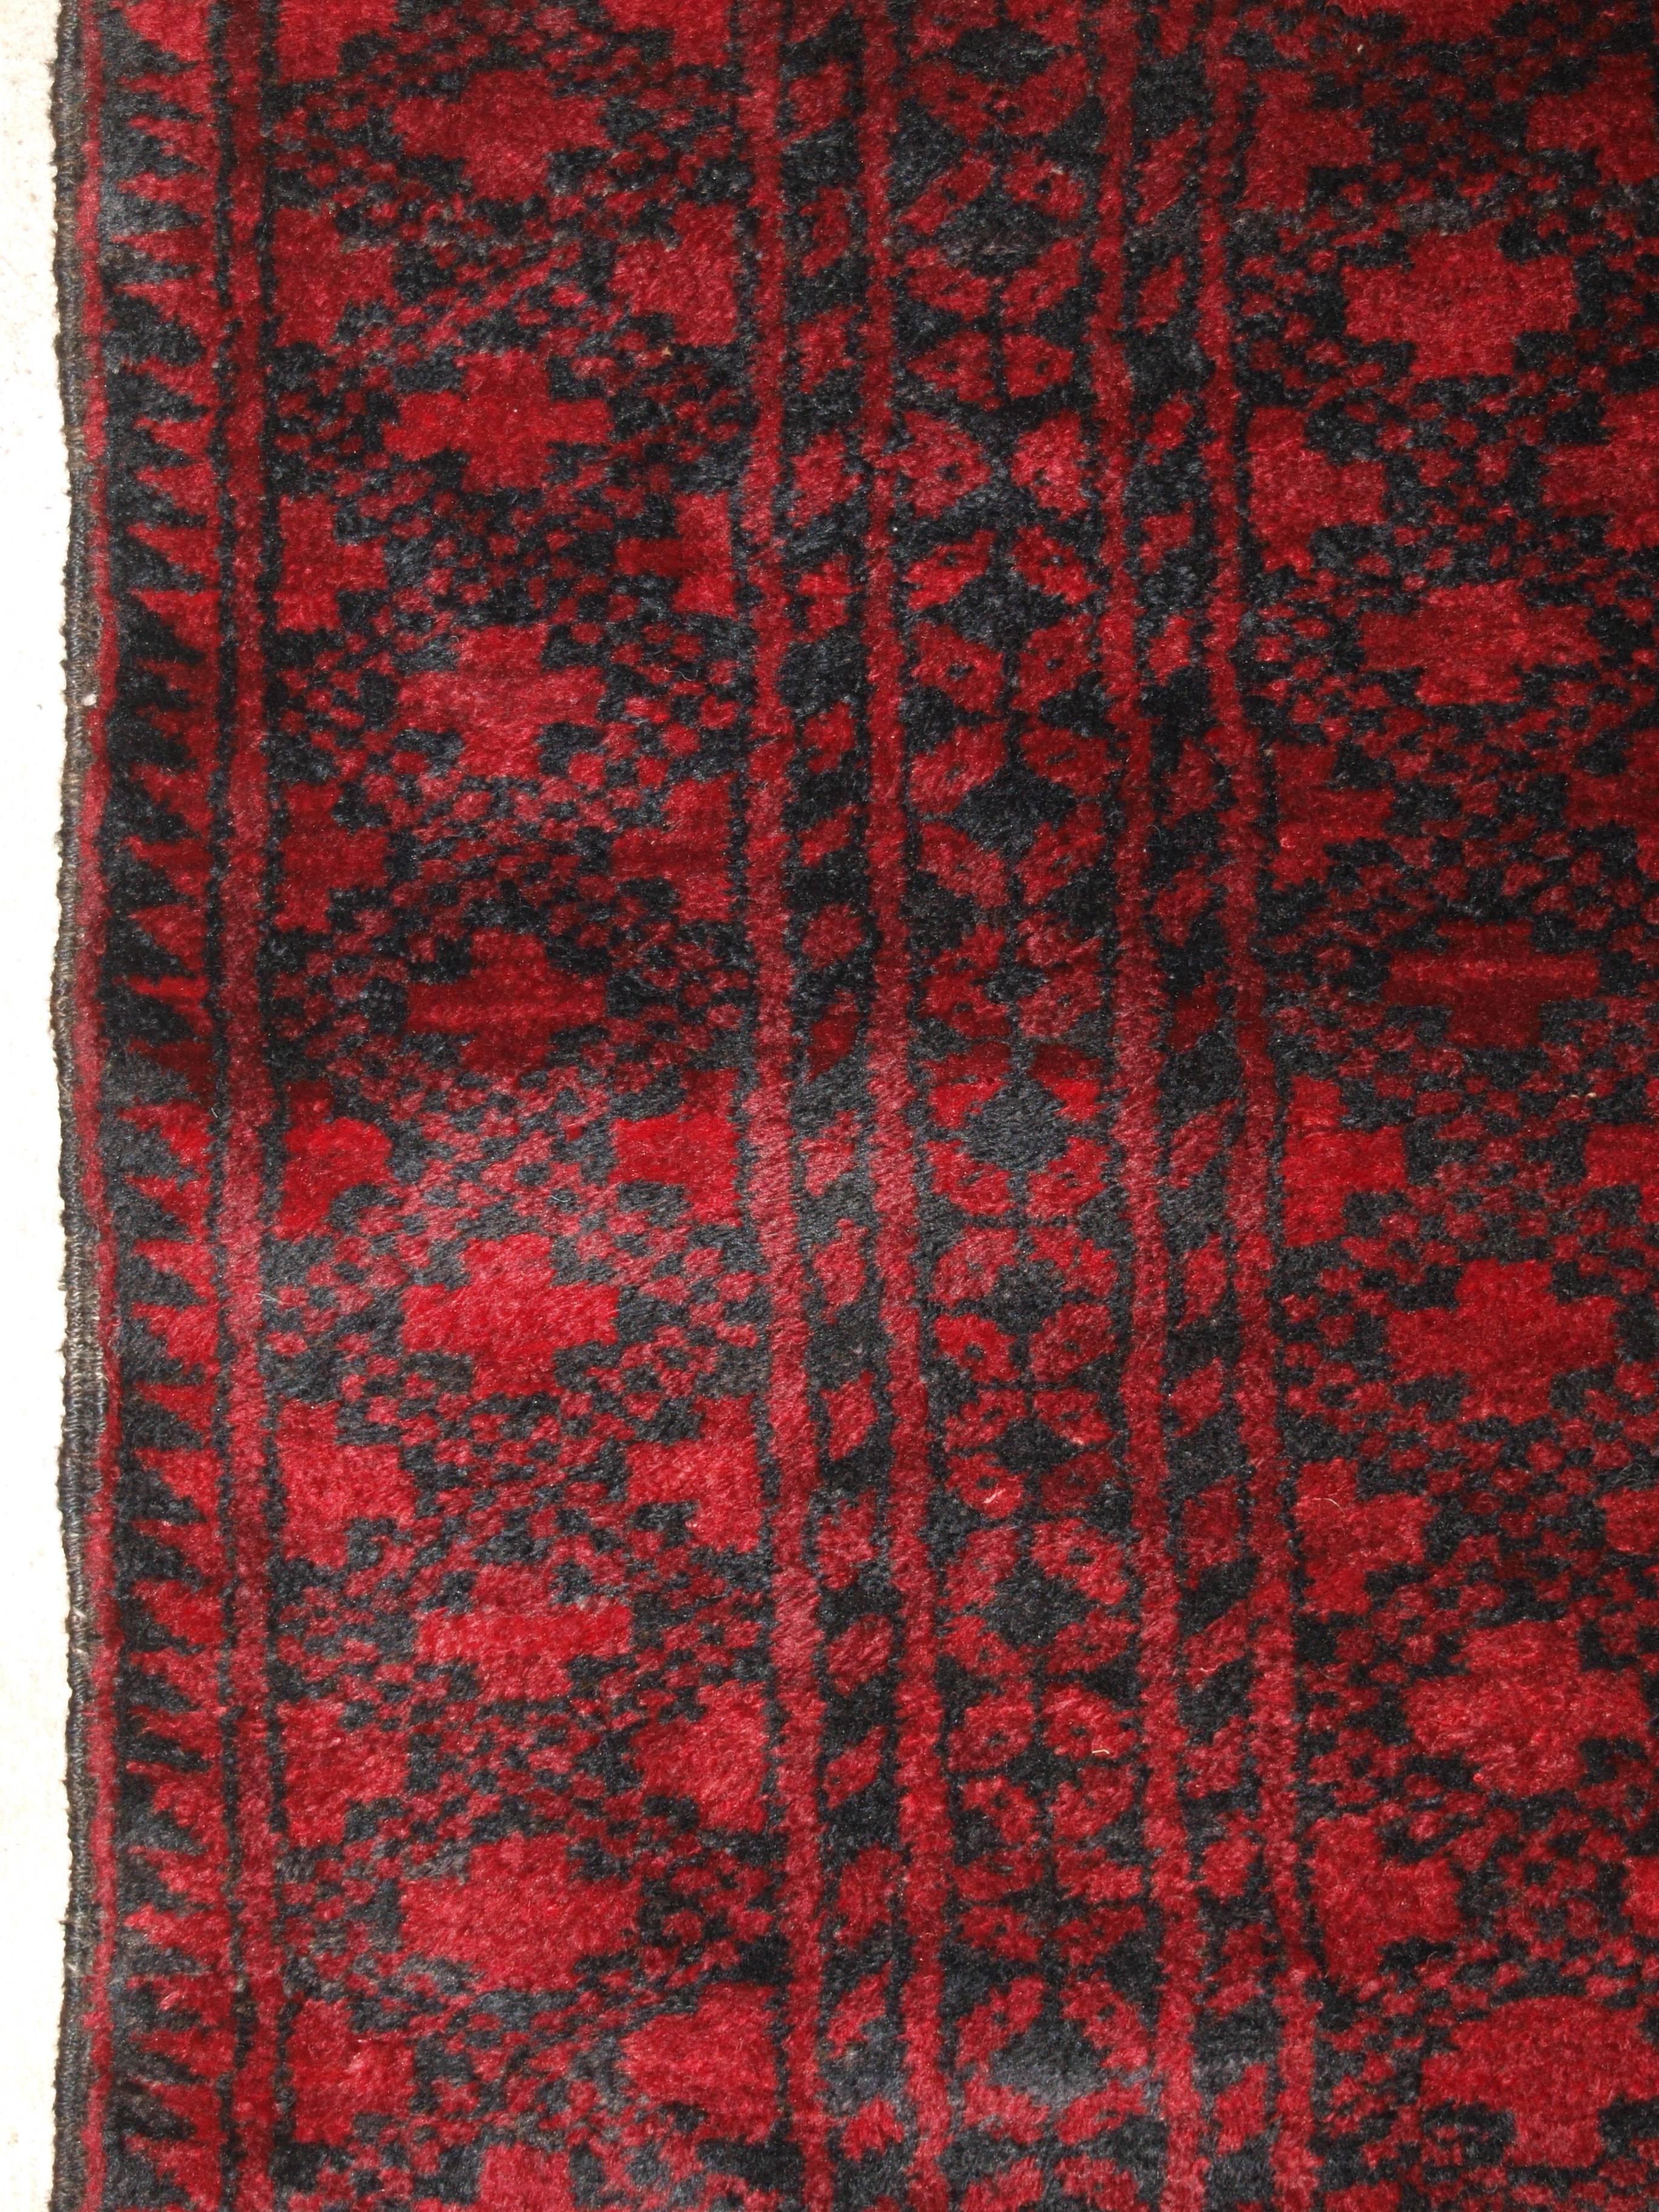 Old Red Afghan Carpet with Traditional Design, circa 1920 In Excellent Condition For Sale In Moreton-in-Marsh, GB